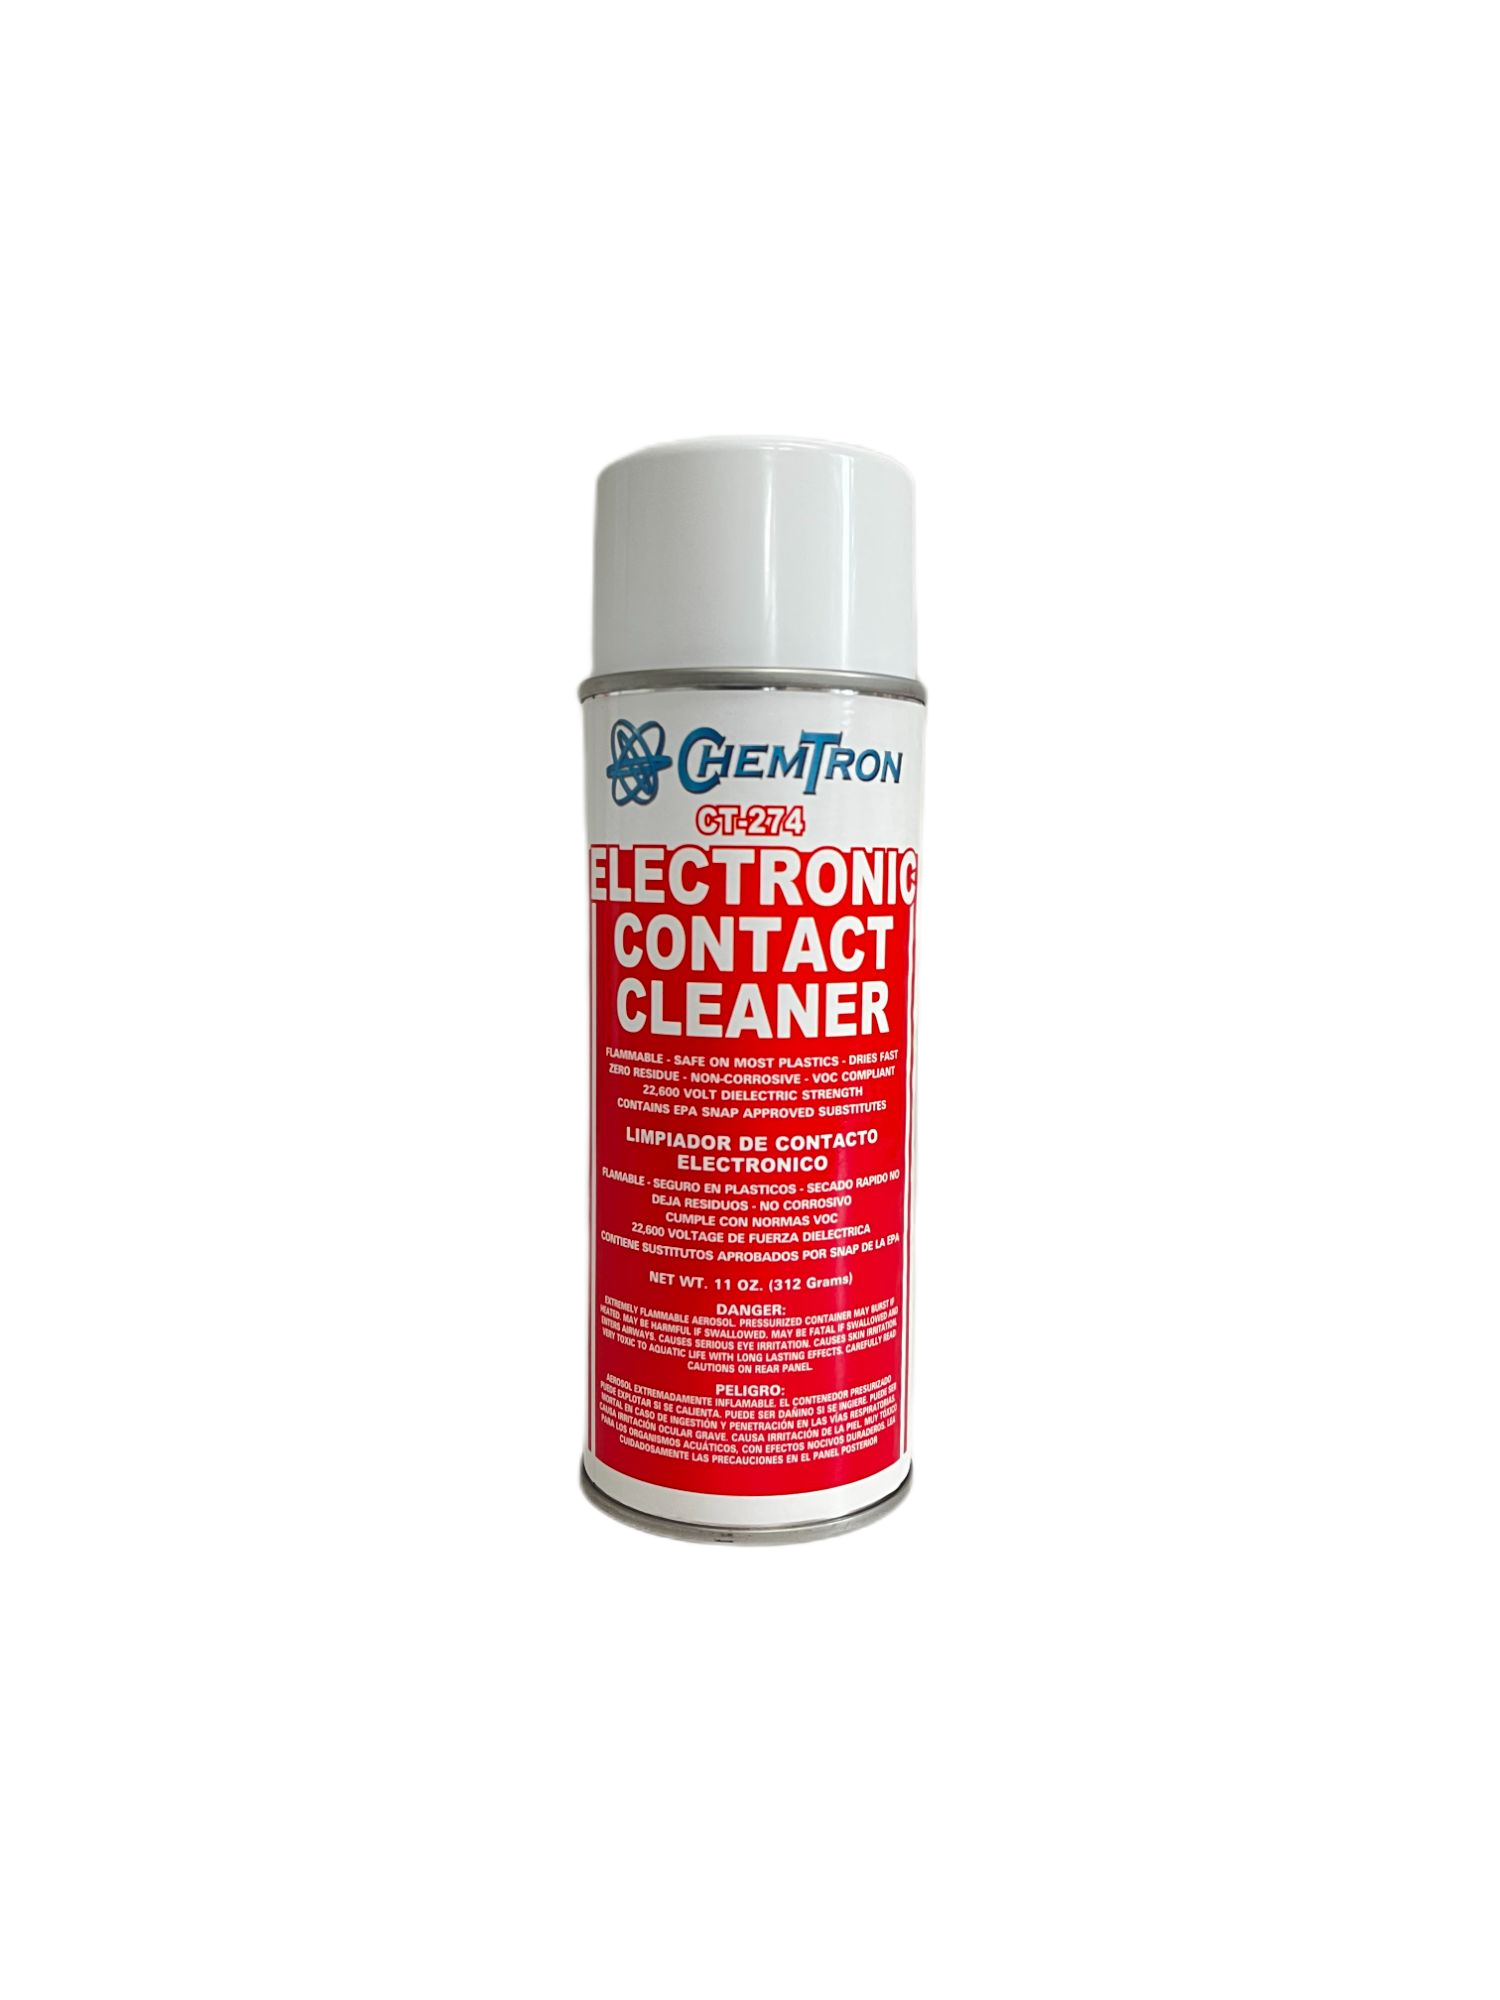 ELECTRONIC CONTACT CLEANER - Chemtron